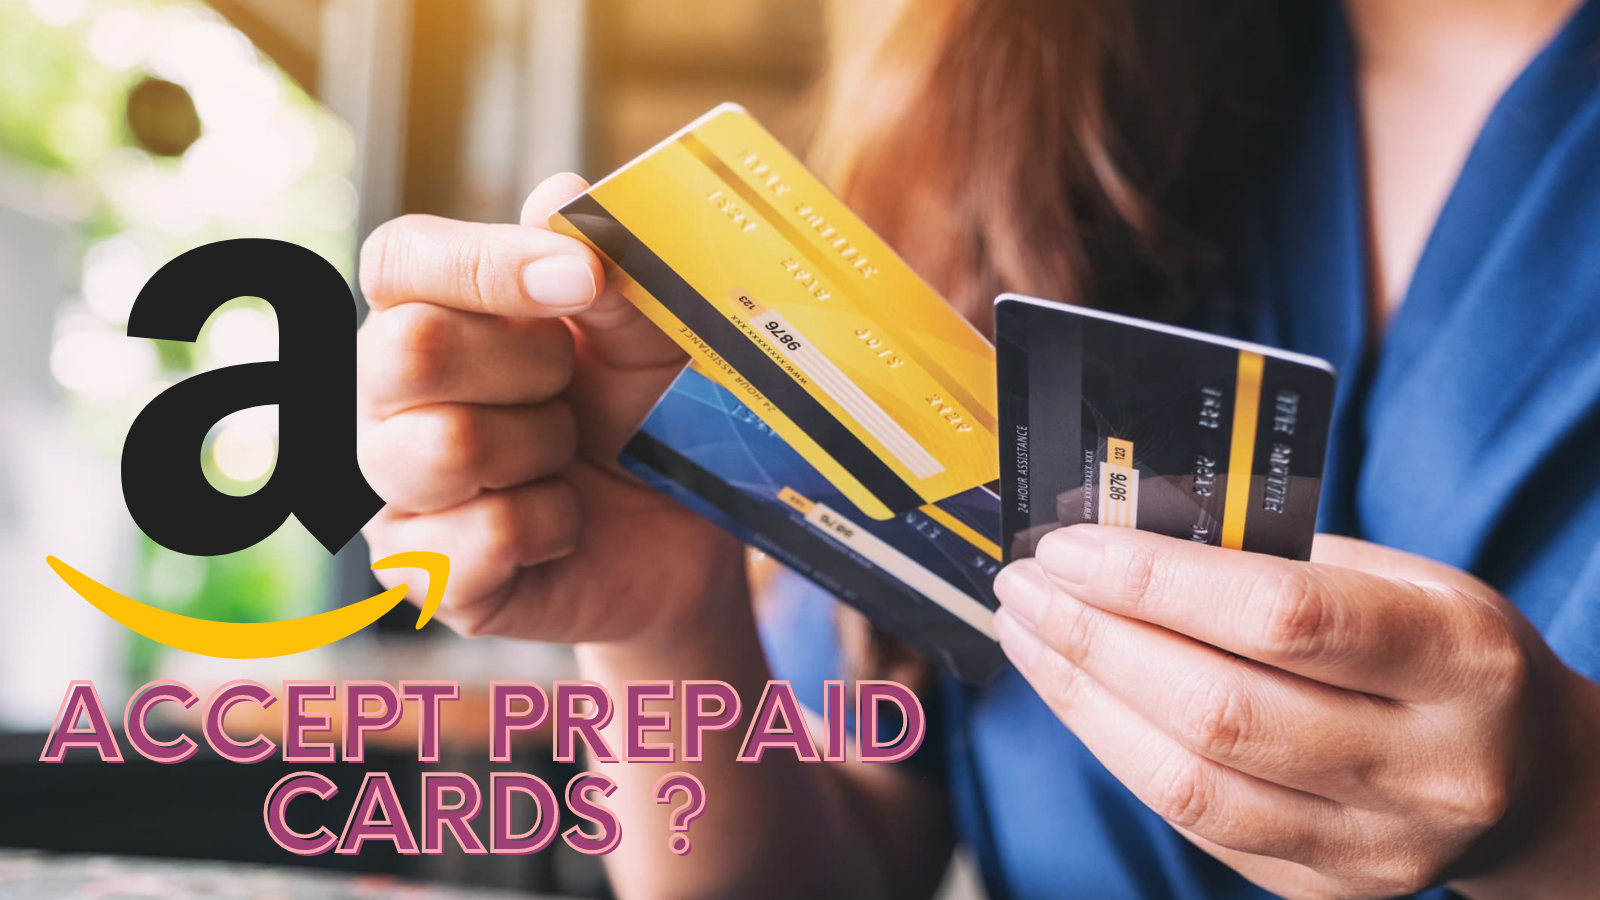 Does Amazon Accept Prepaid Cards in 2022